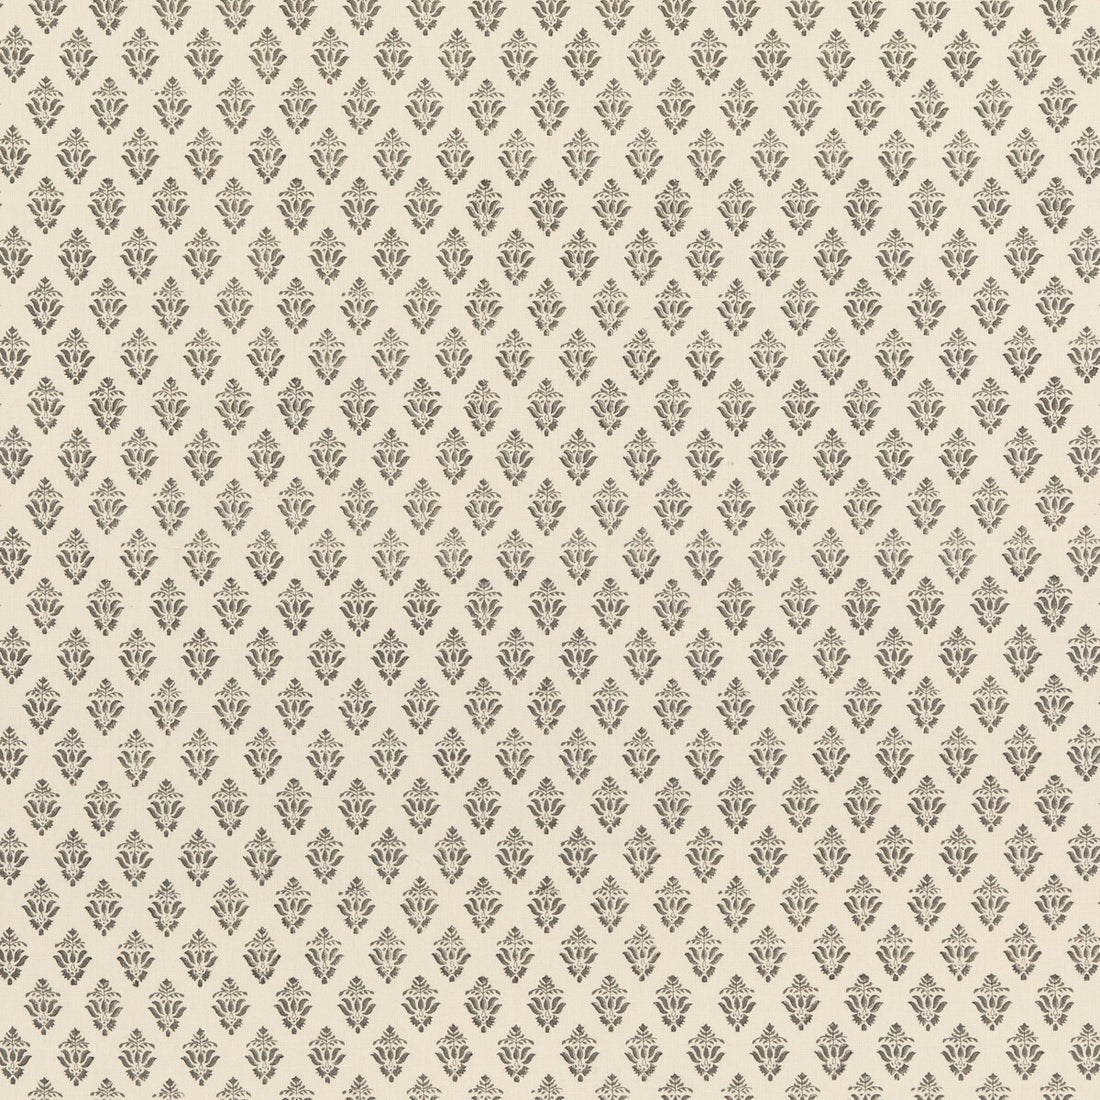 Thornham fabric in warm grey color - pattern BP10793.1.0 - by G P &amp; J Baker in the Artisan II collection